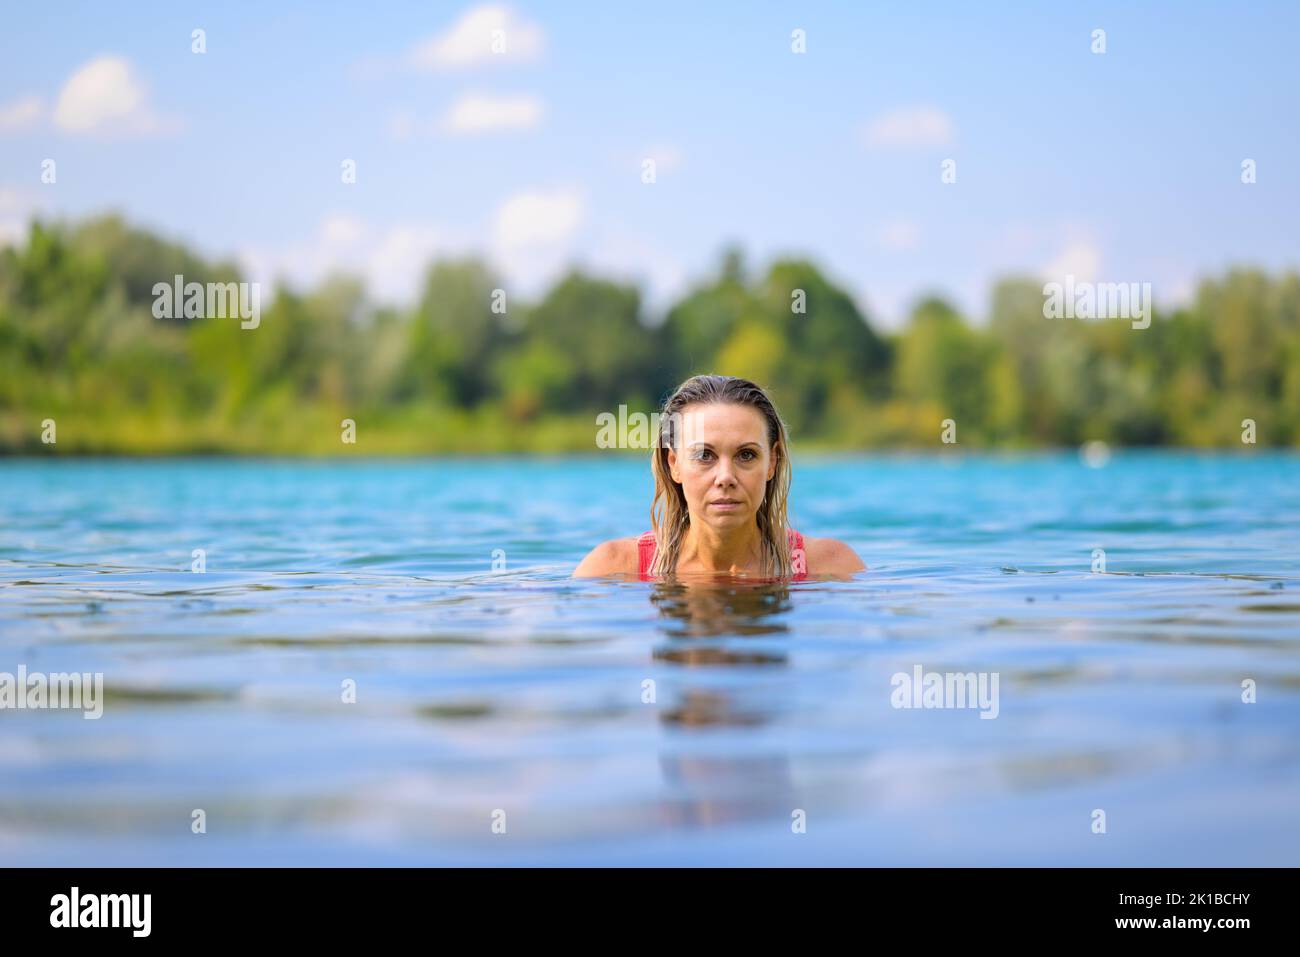 Gorgeous attractive blond woman with wet hair in a red swimsuit slowly rising out of the water with a stern look Stock Photo